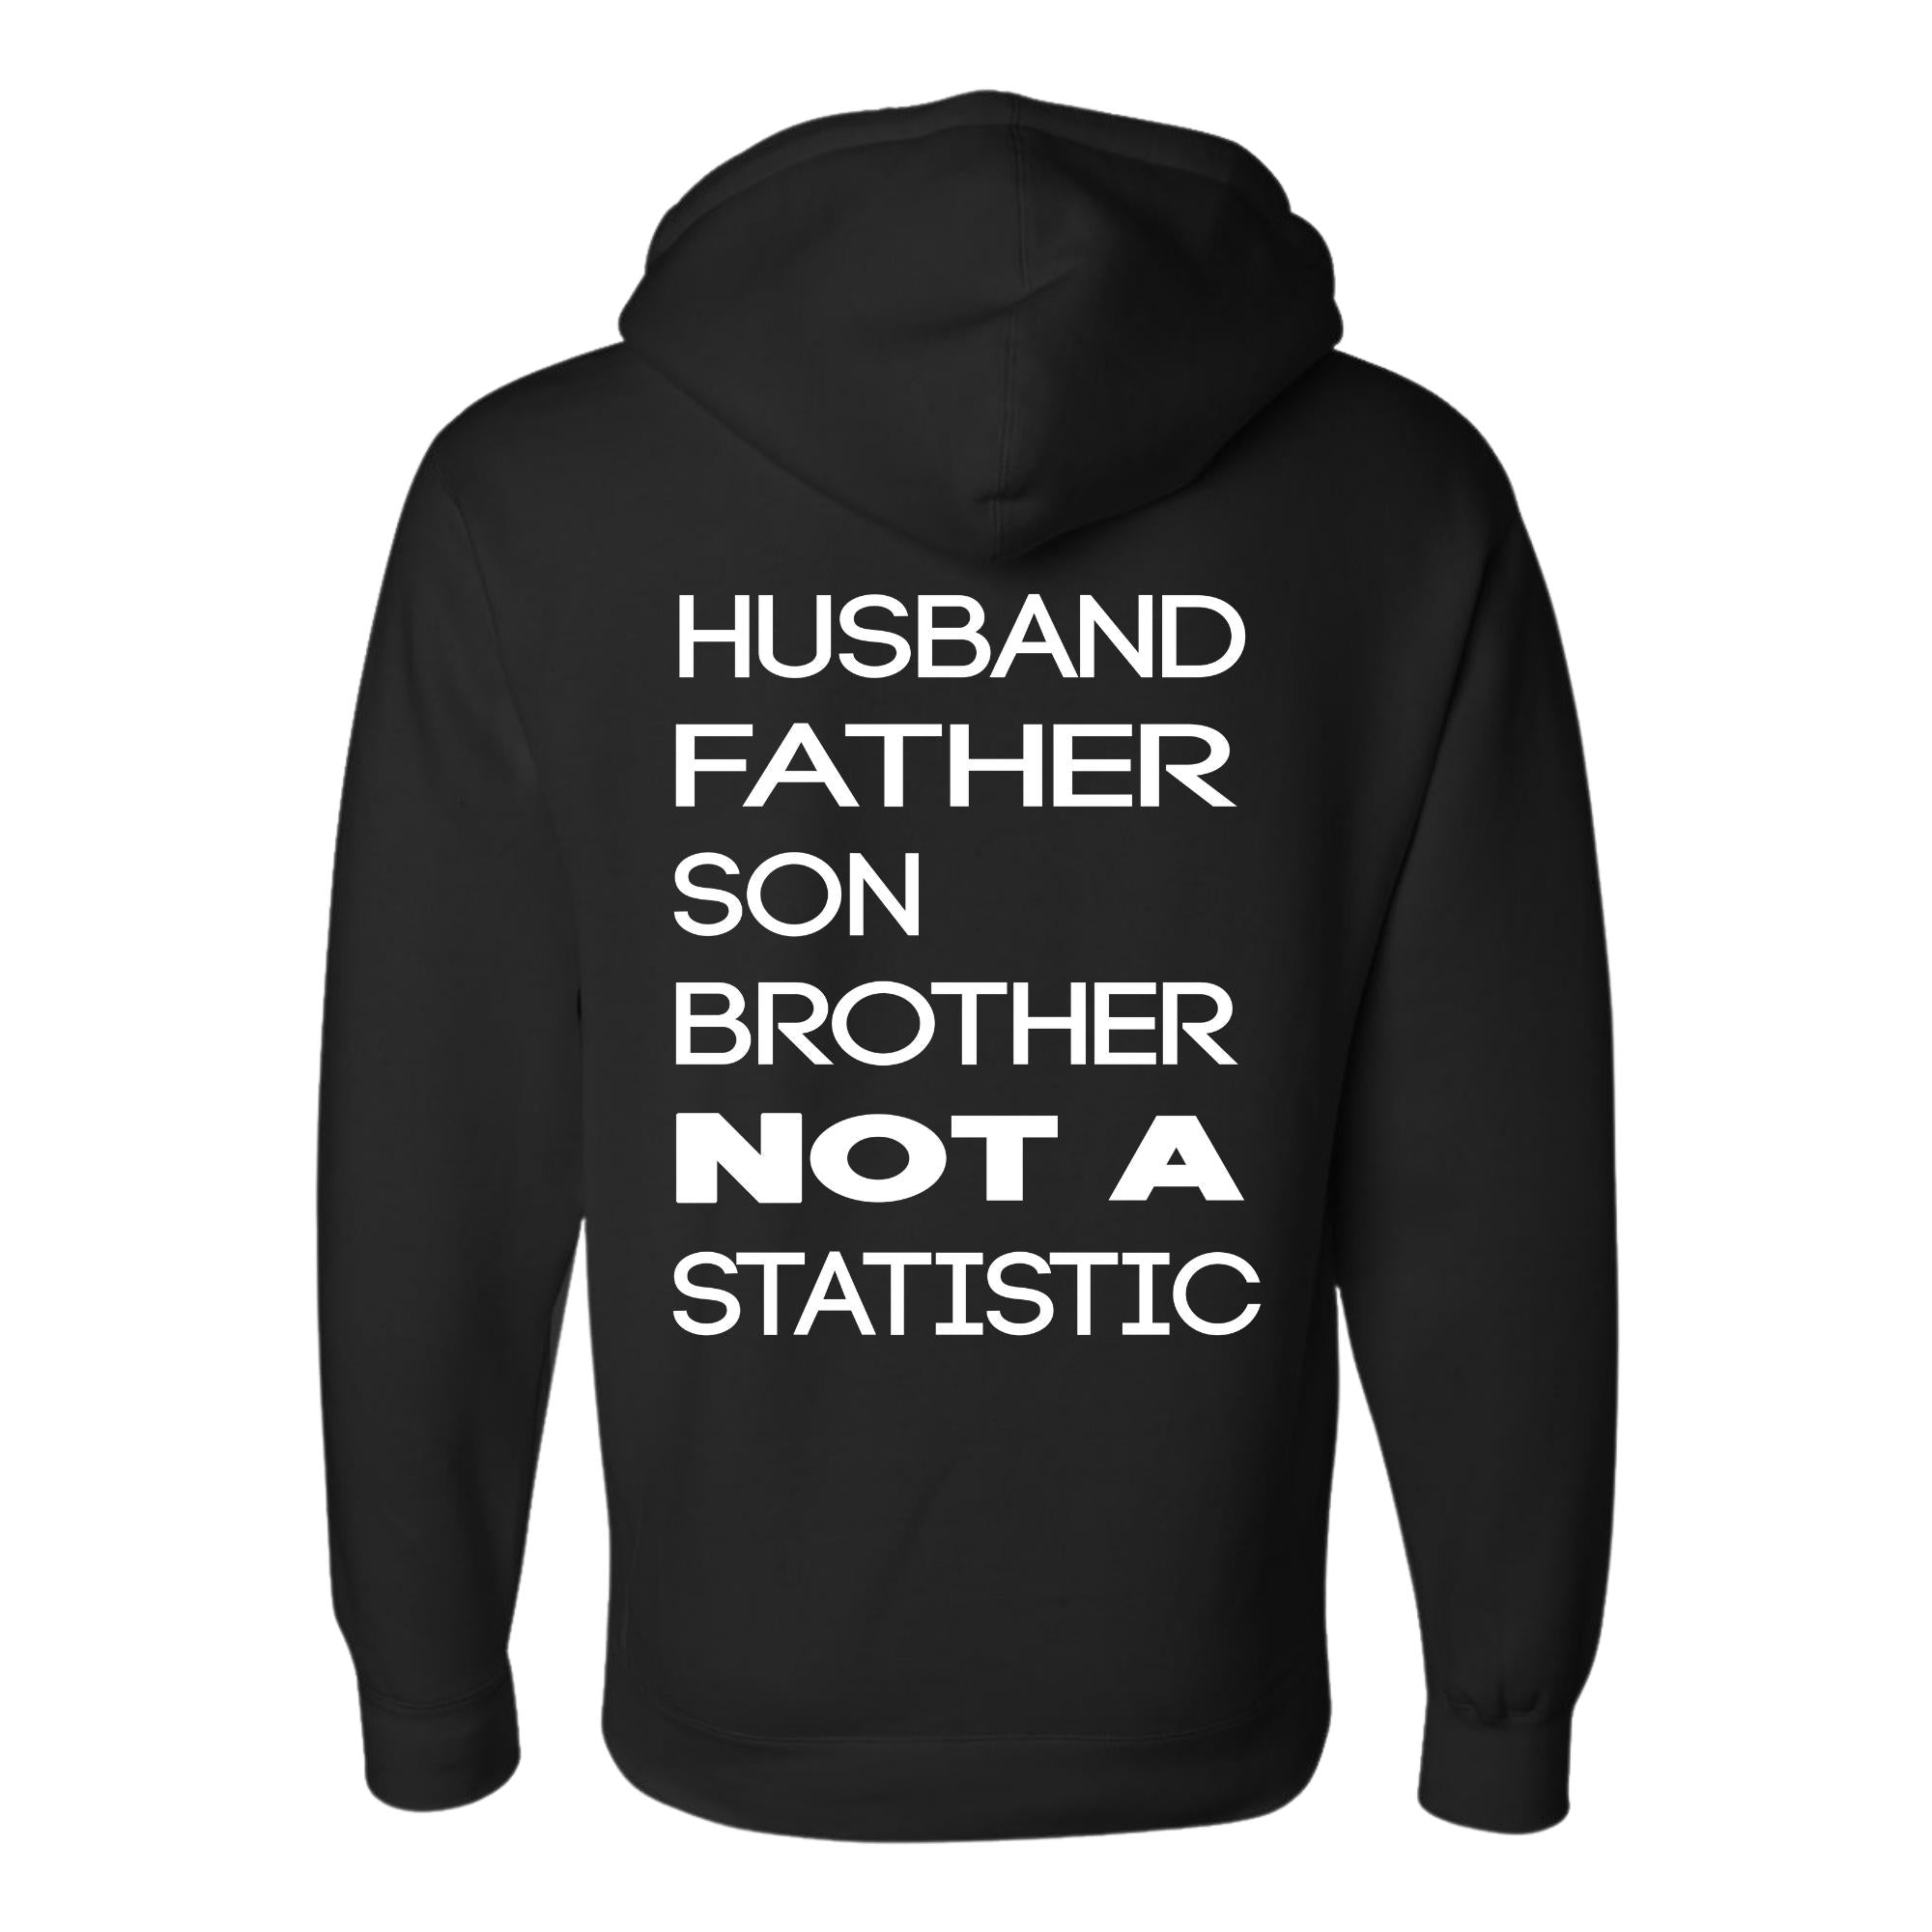 NOT A STATISTIC MEN'S HOODIE - IAMLUVbyV